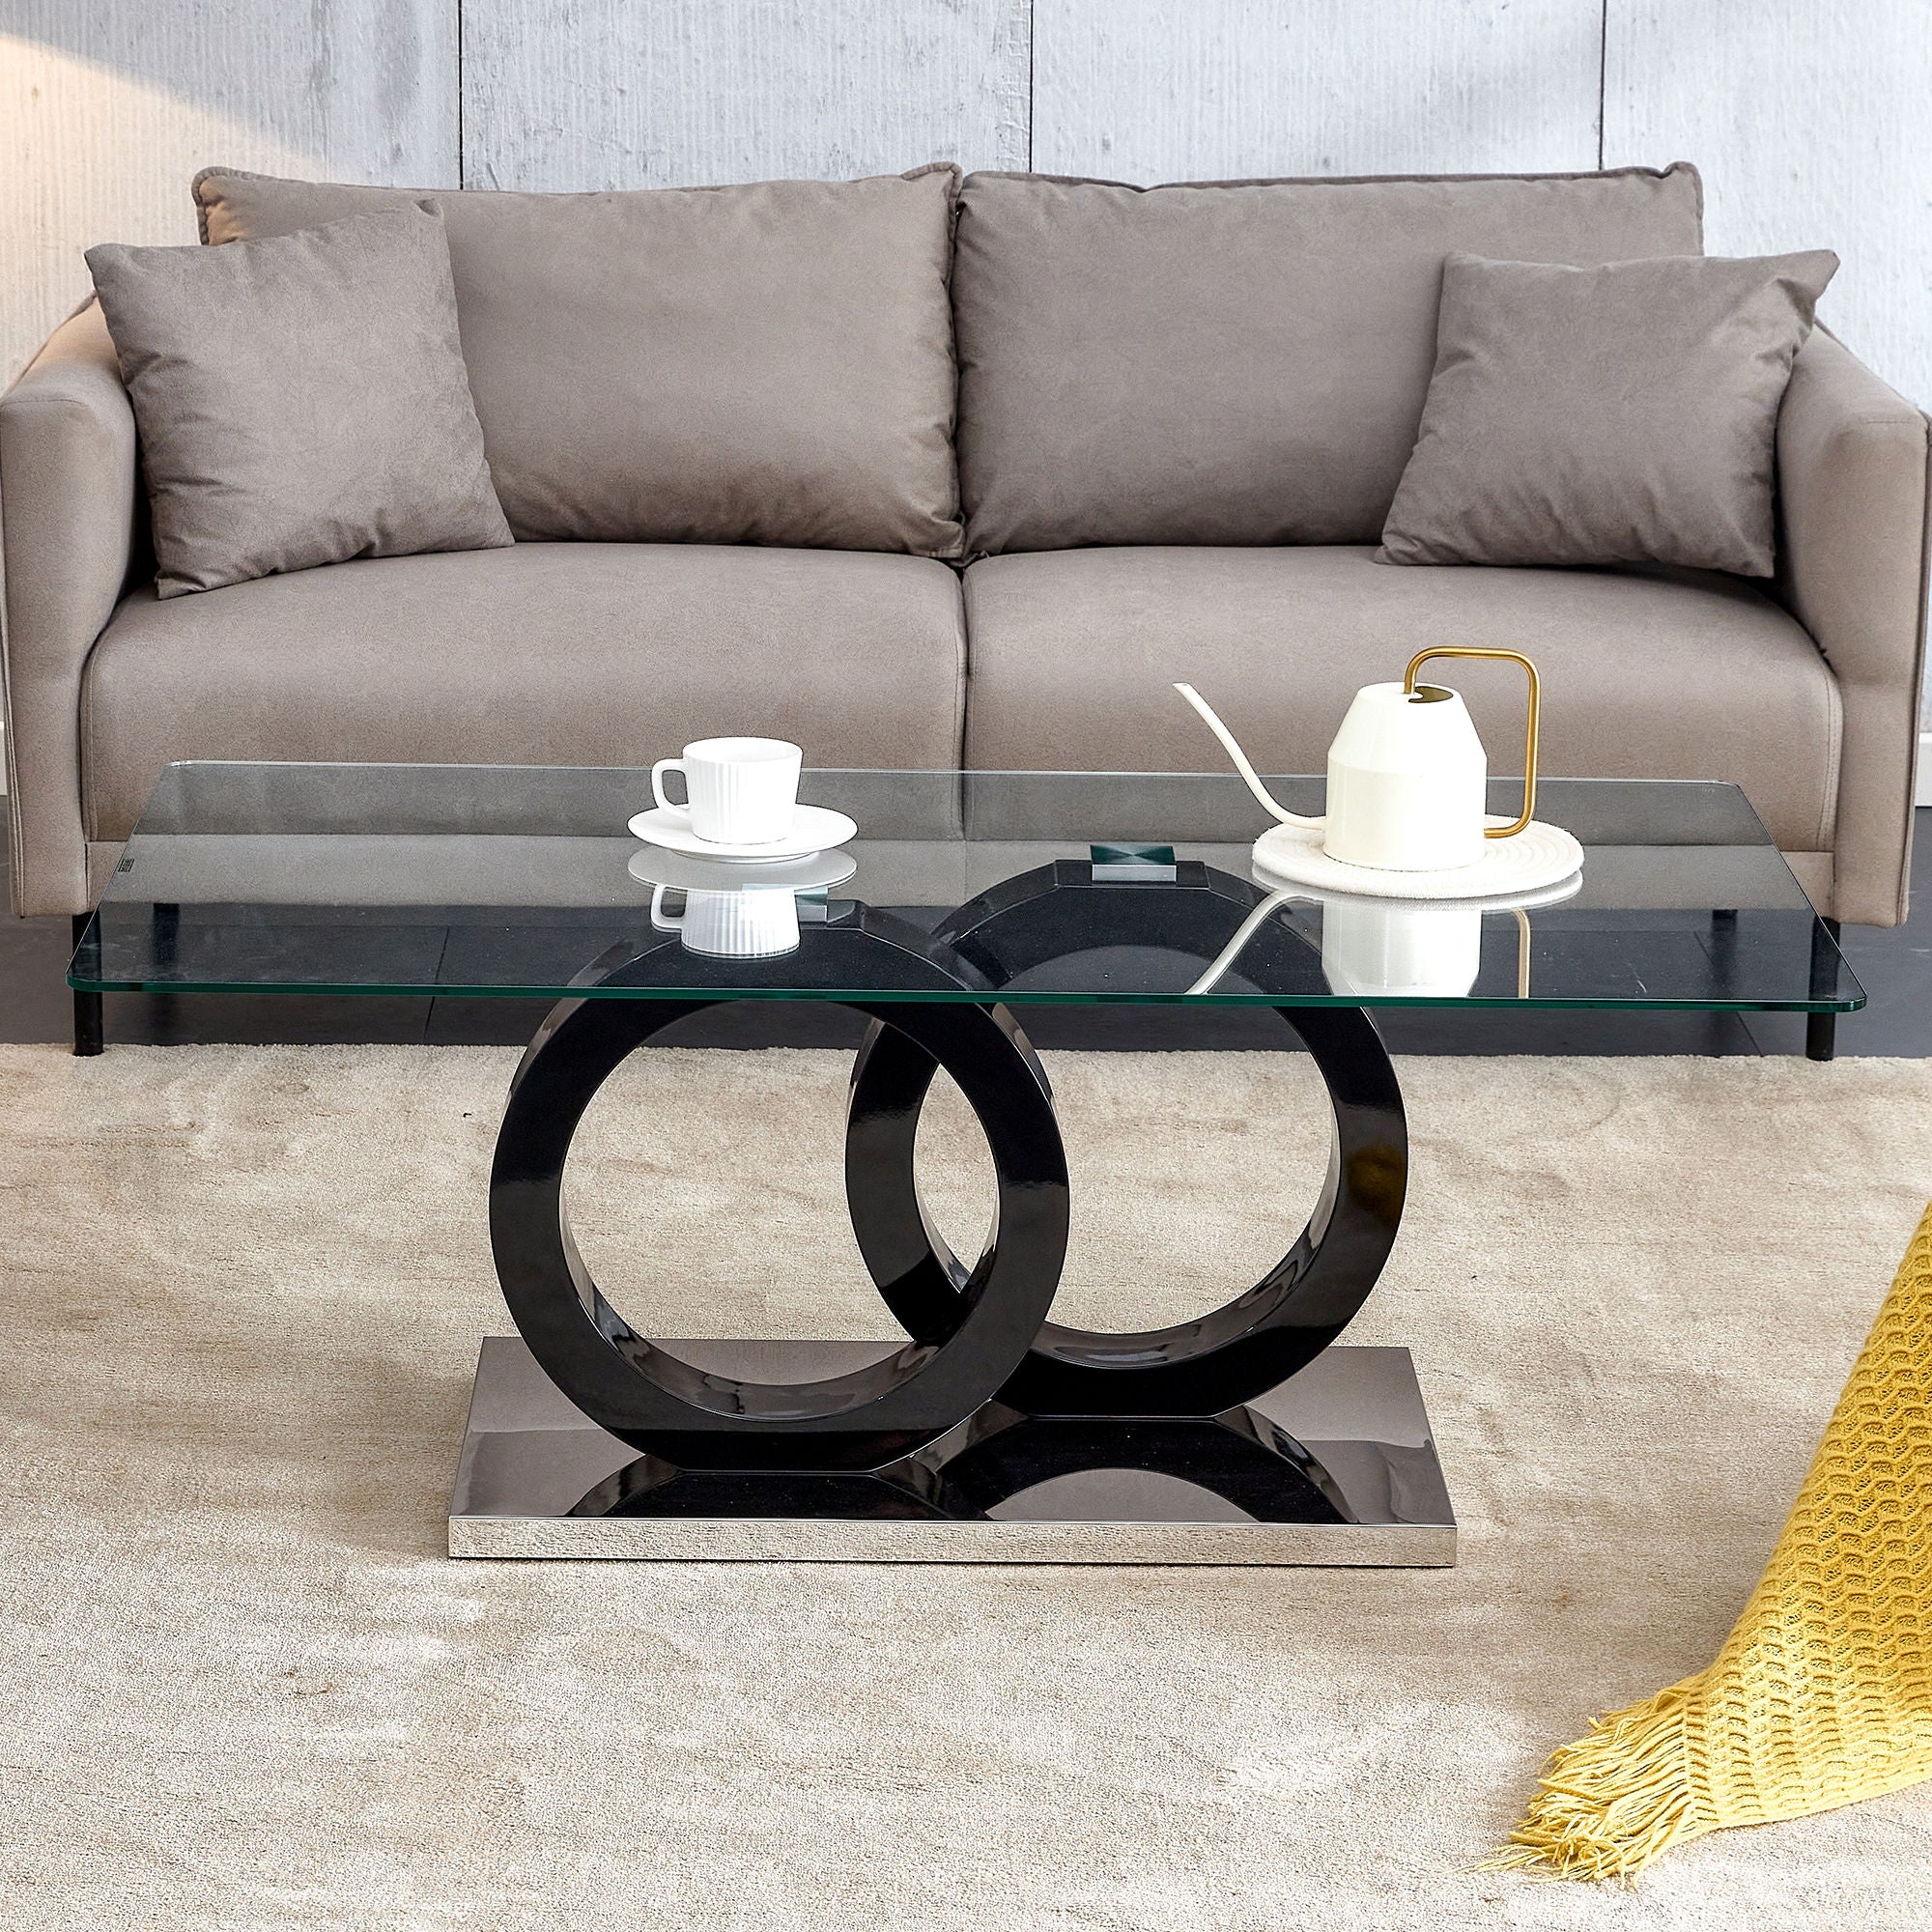 A Rectangular Modern And Fashionable Coffee Table With Tempered Glass Tabletop And Black Legs Suitable For Living Room